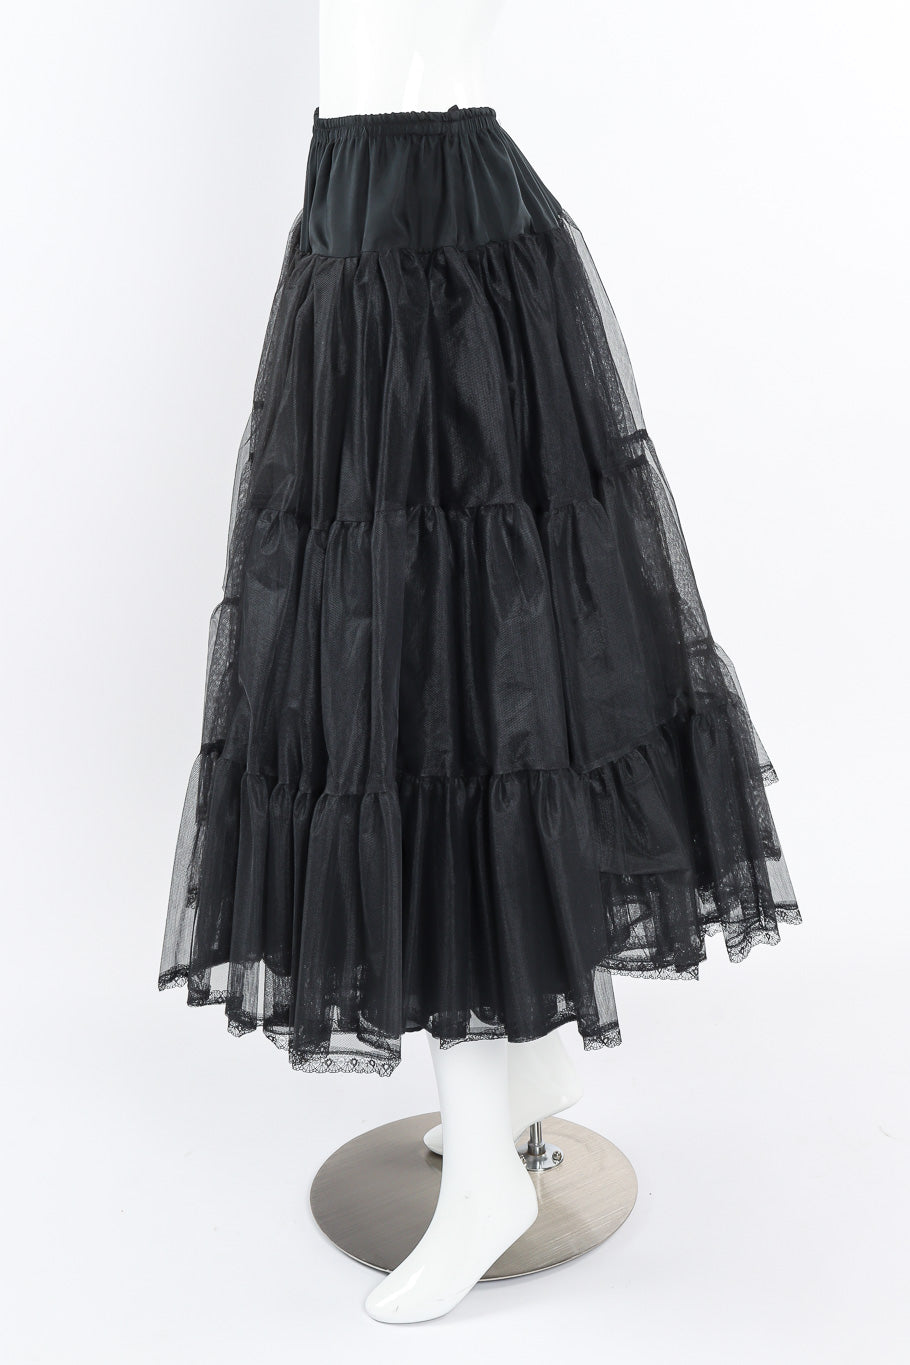 Petticoat skirt by Morgane Le Fay on mannequin side @recessla